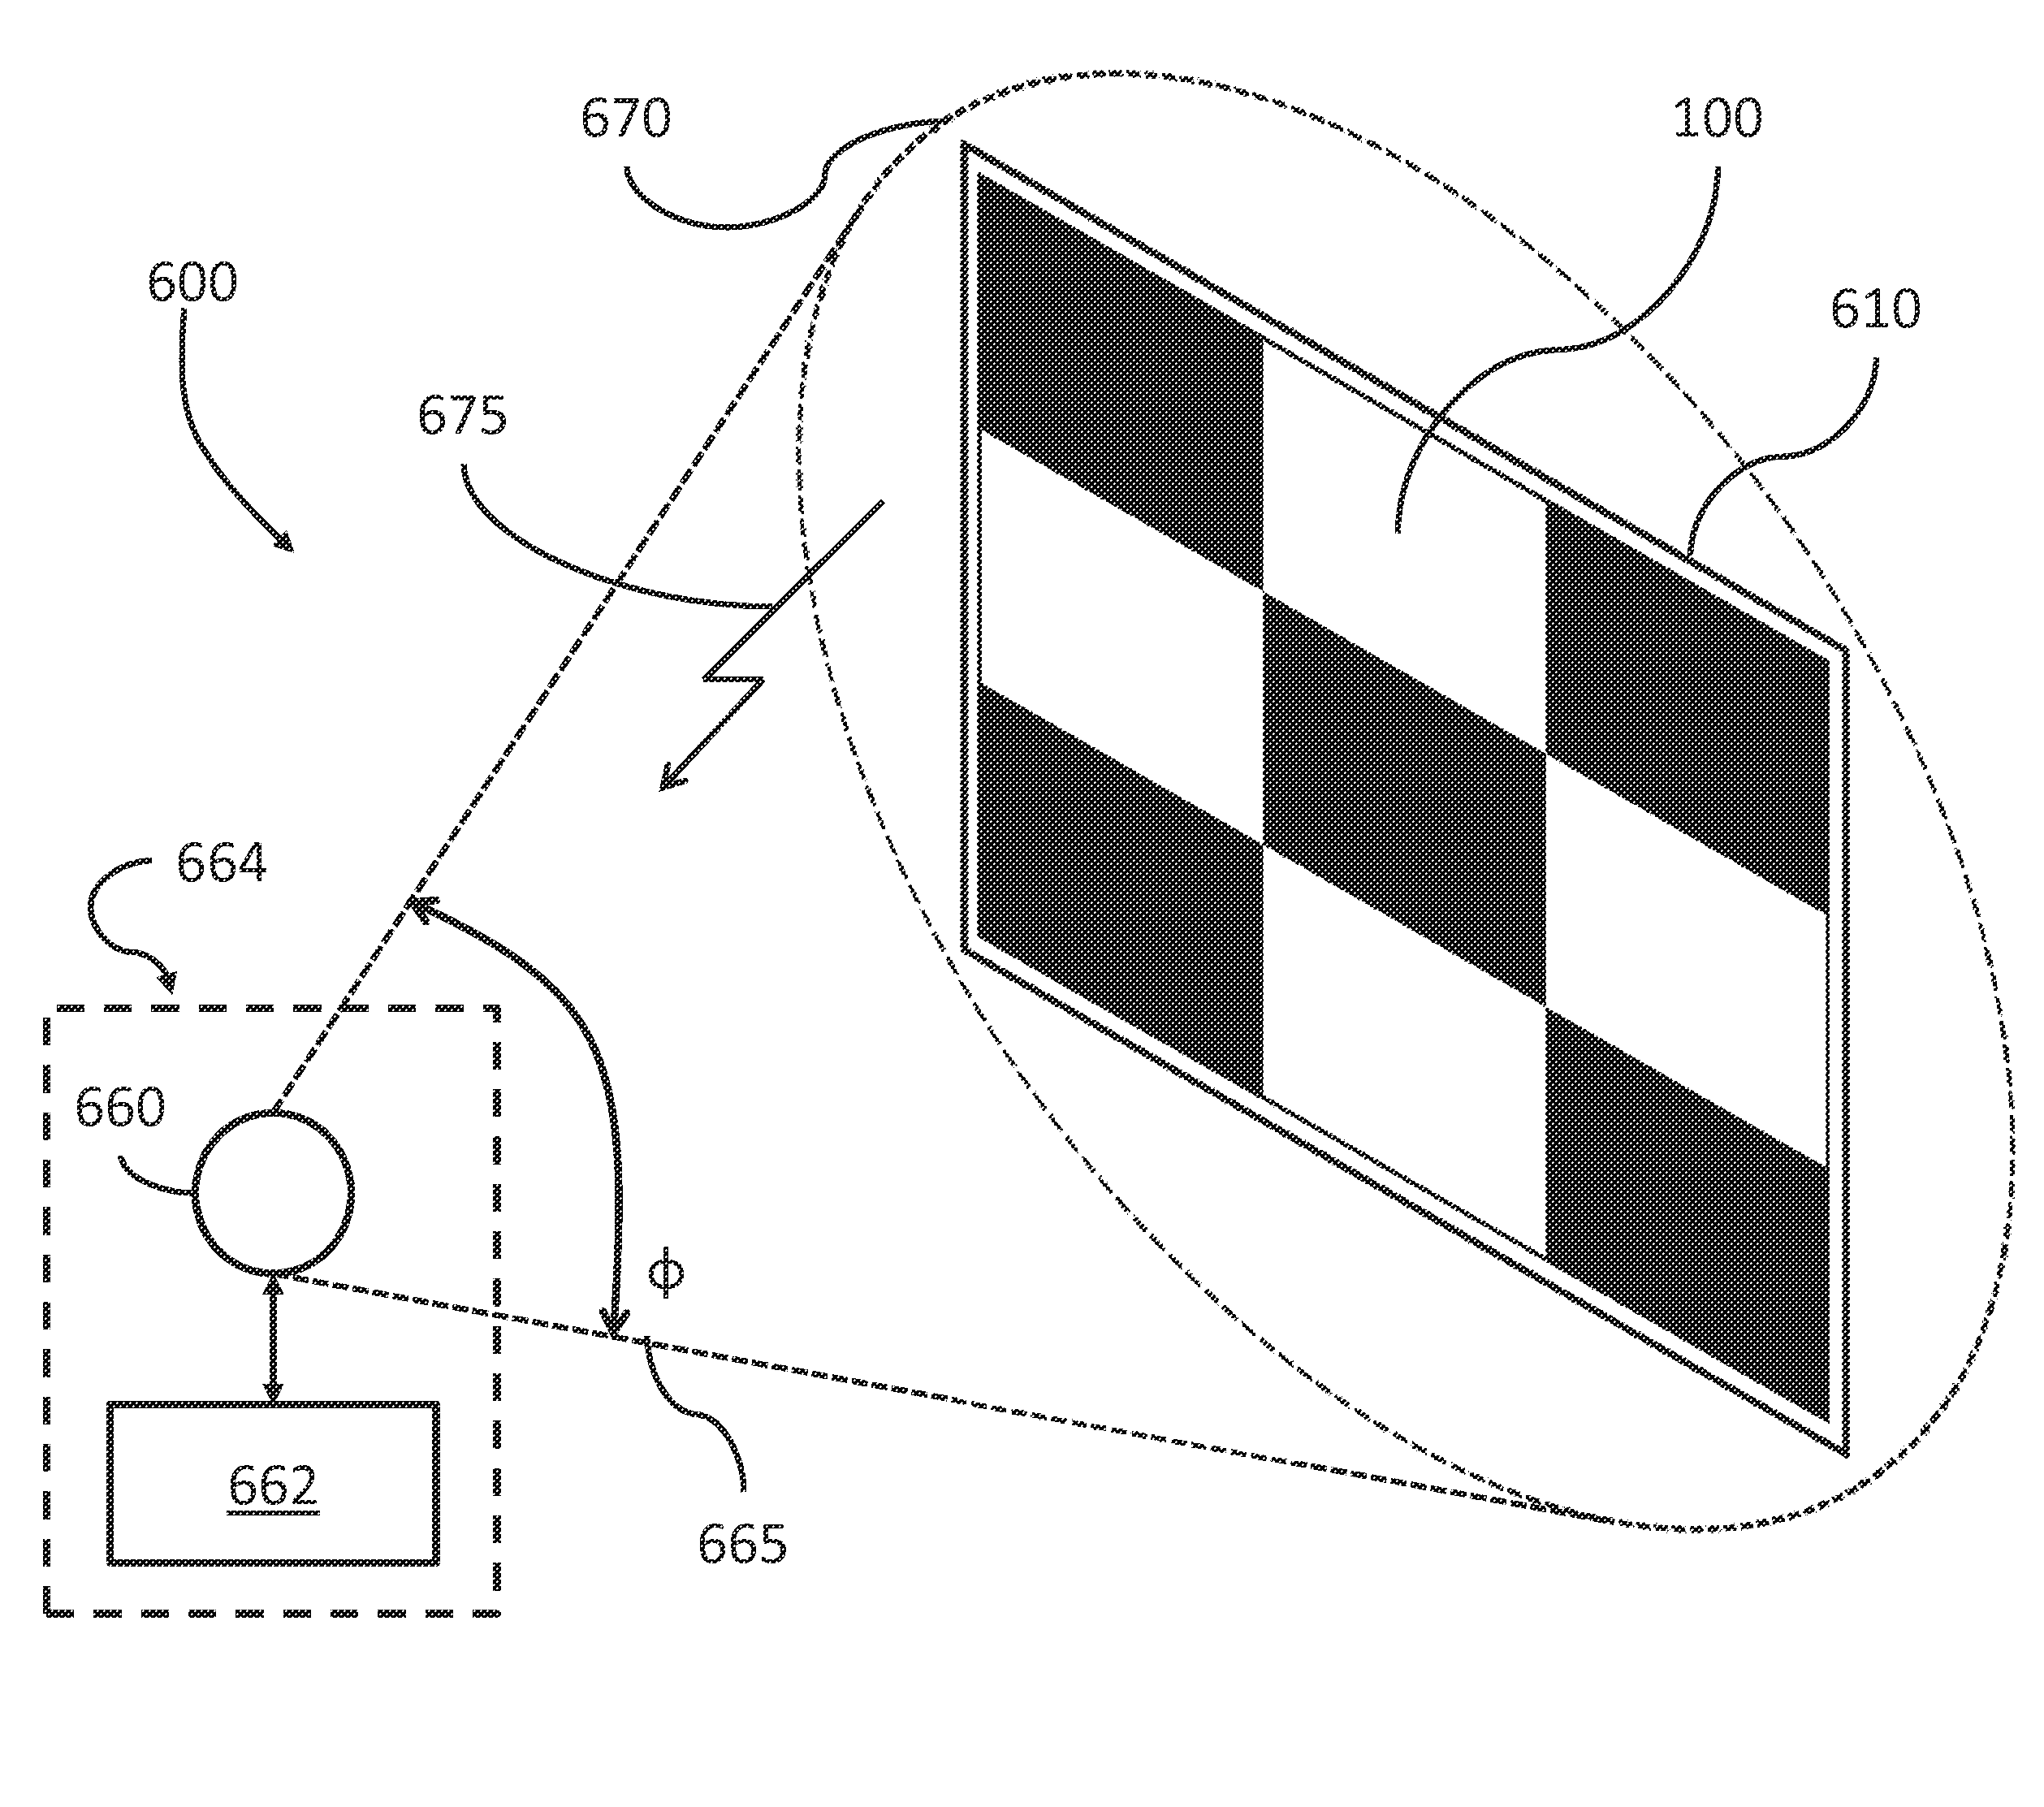 Apparatus and Method to Measure Display Quality